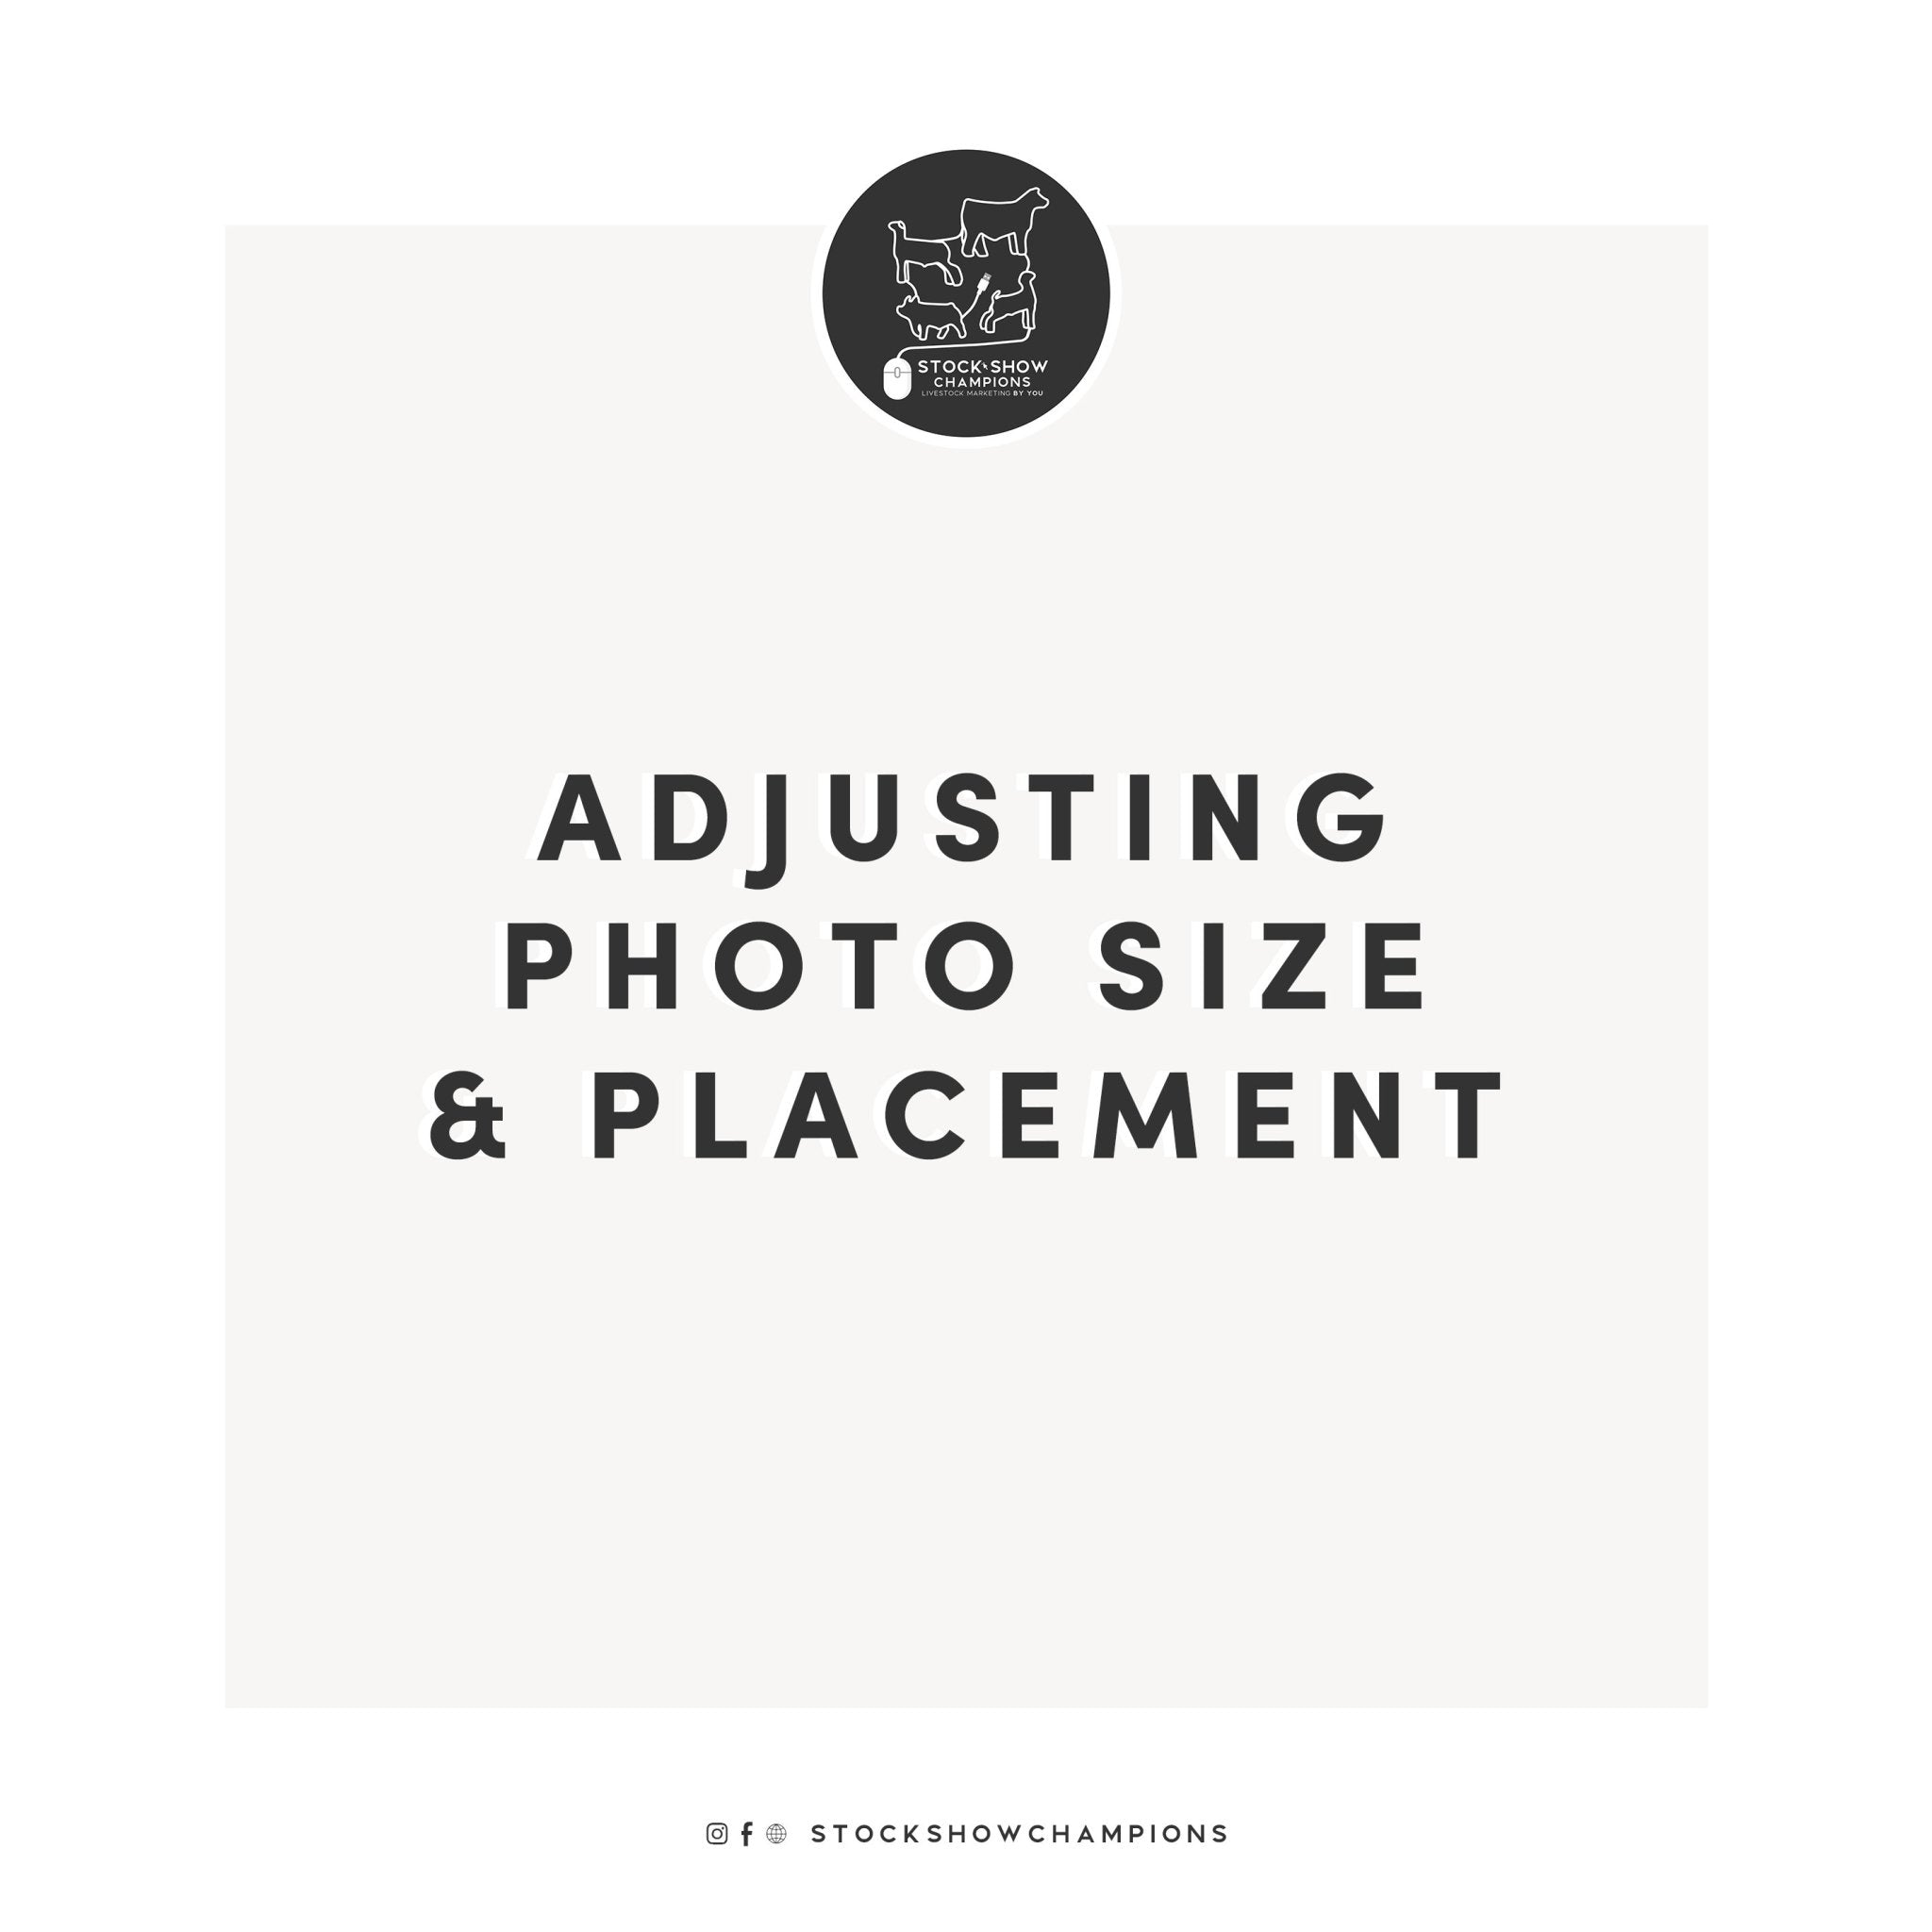 Adjusting photo size & placement - Livestock & Co.